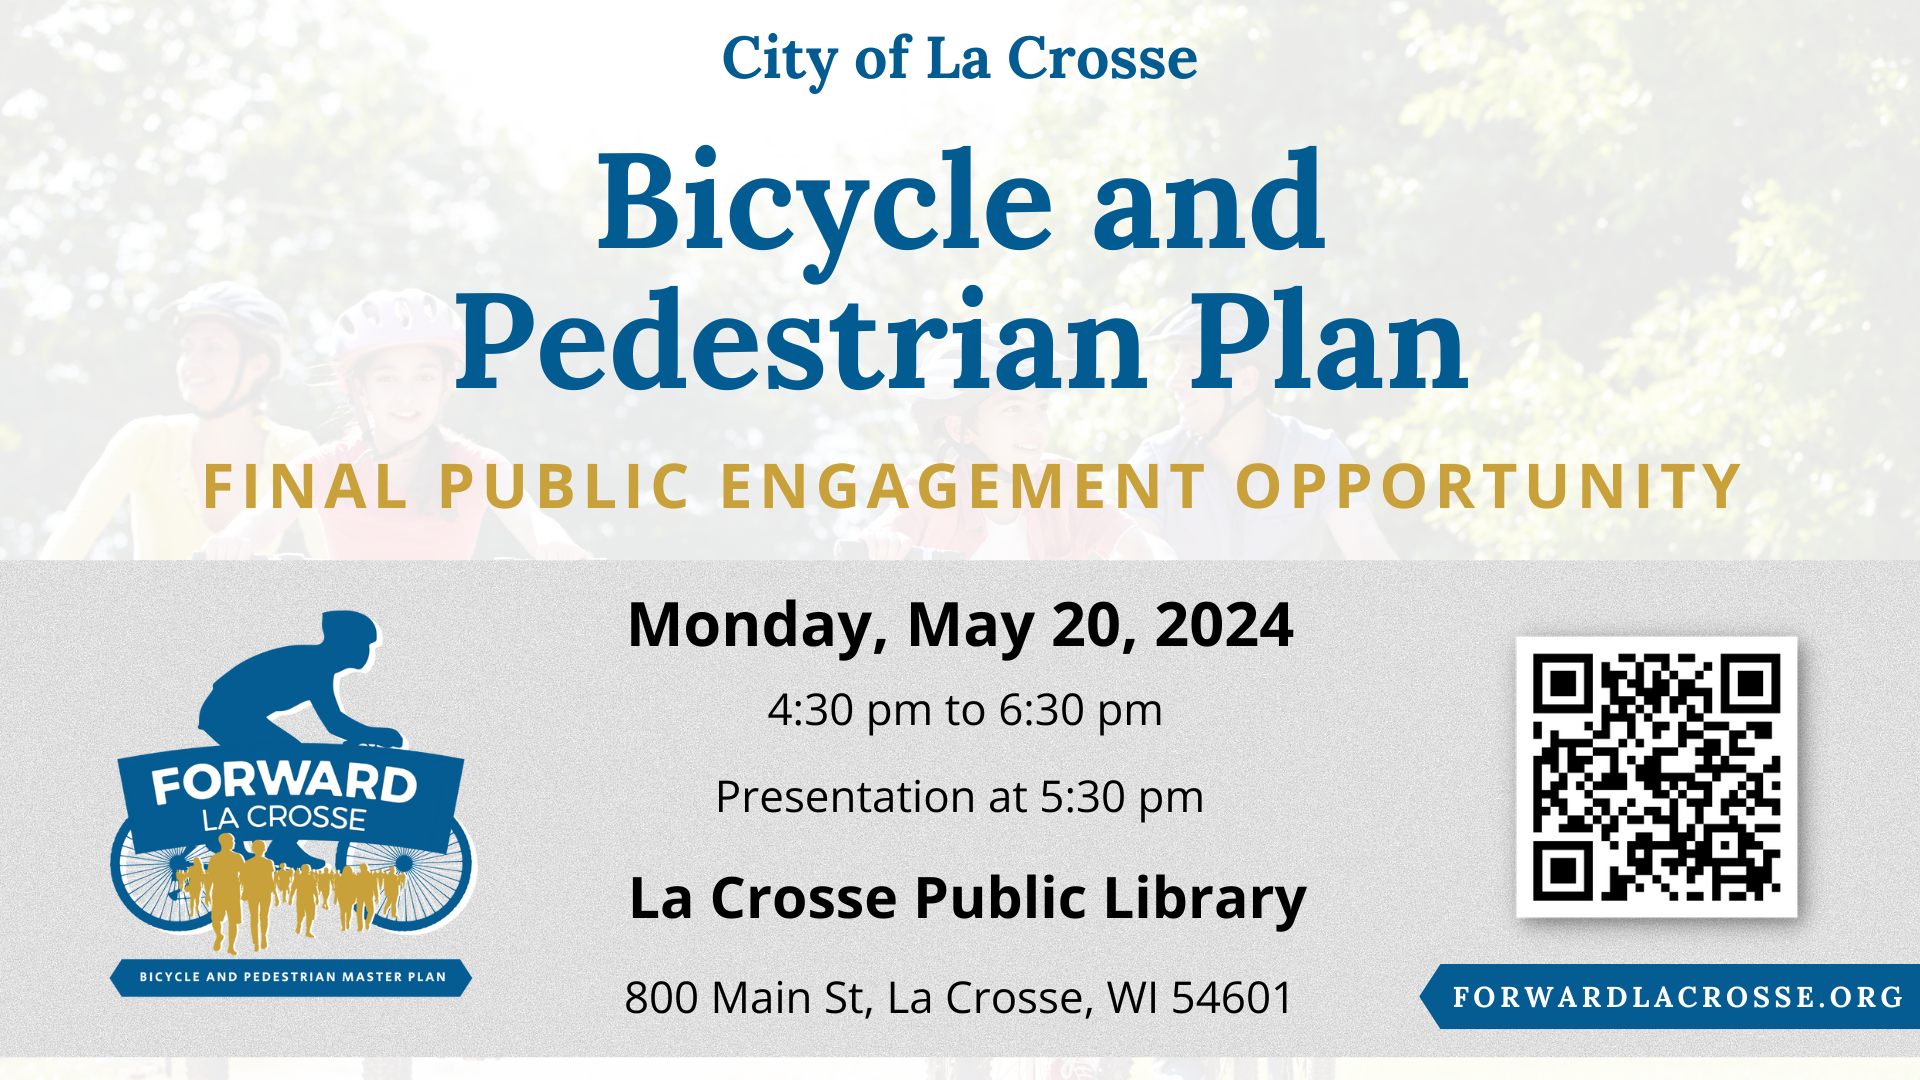 Forward La Crosse will be hosting the Final Public Engagement Opportunity on Monday, May 20th